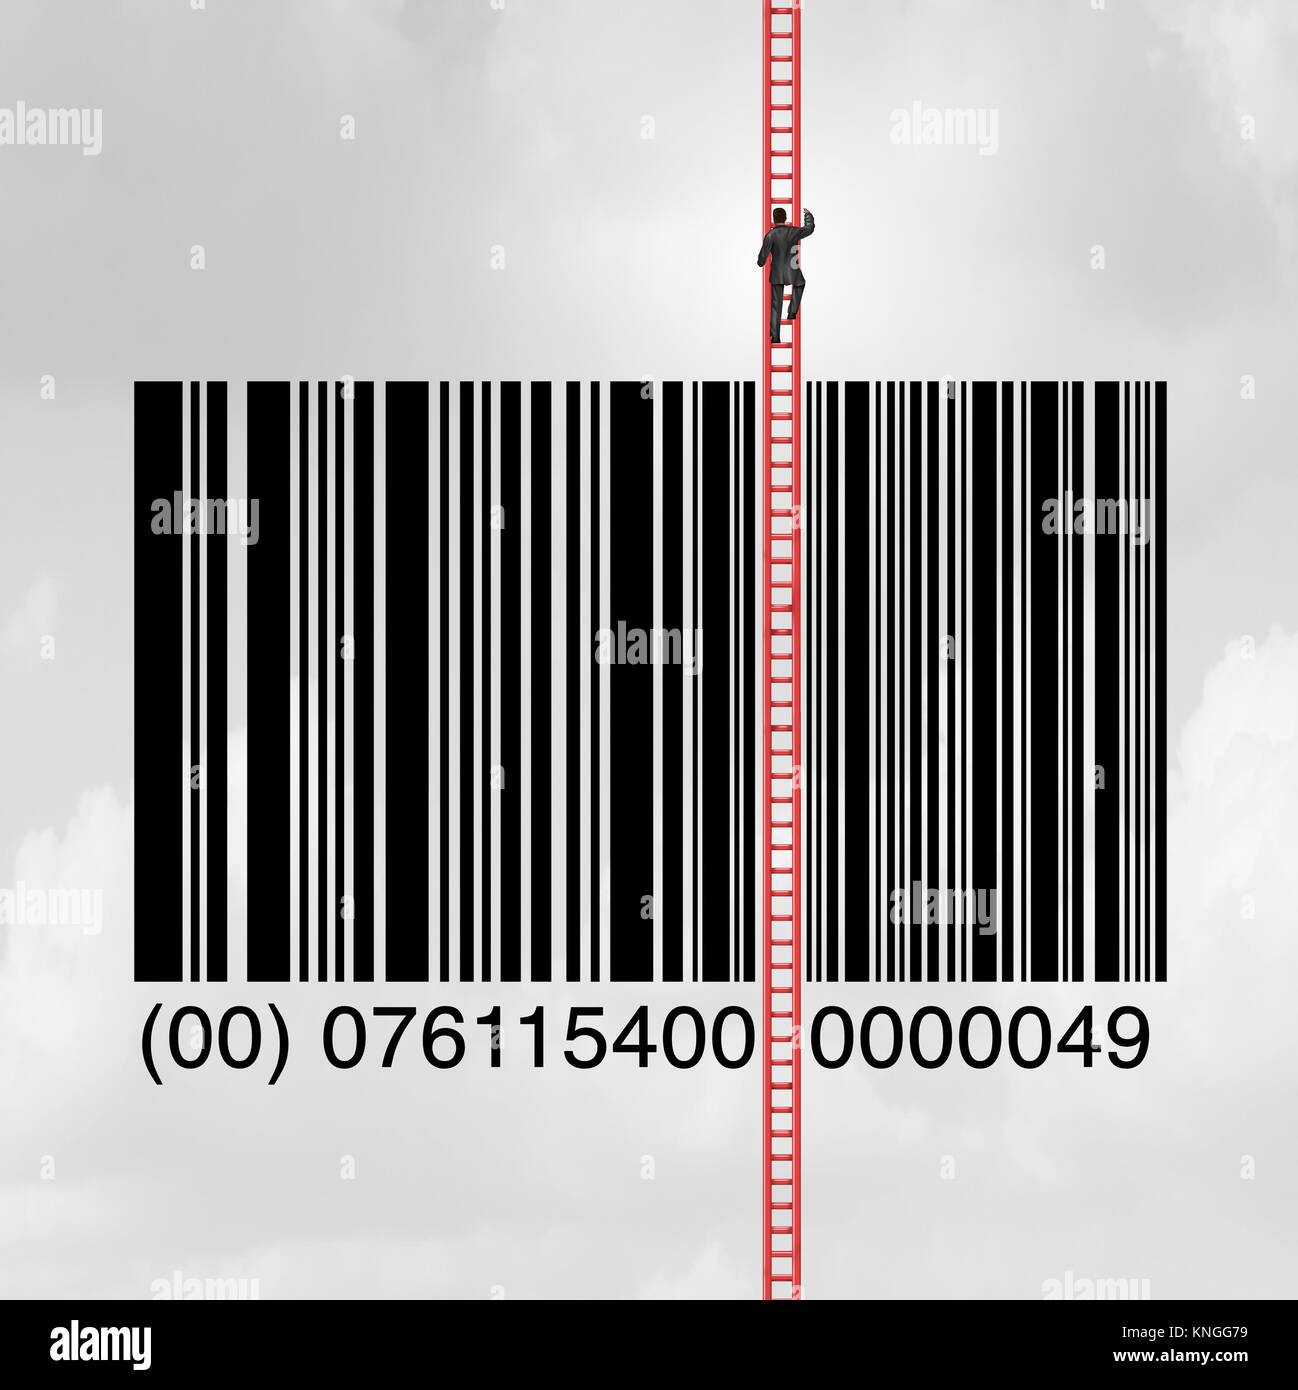 Retail sales solution as a consumer and cutomer or executive climbing a ladder on a upc code barcode as a symbol for commerce. Stock Photo